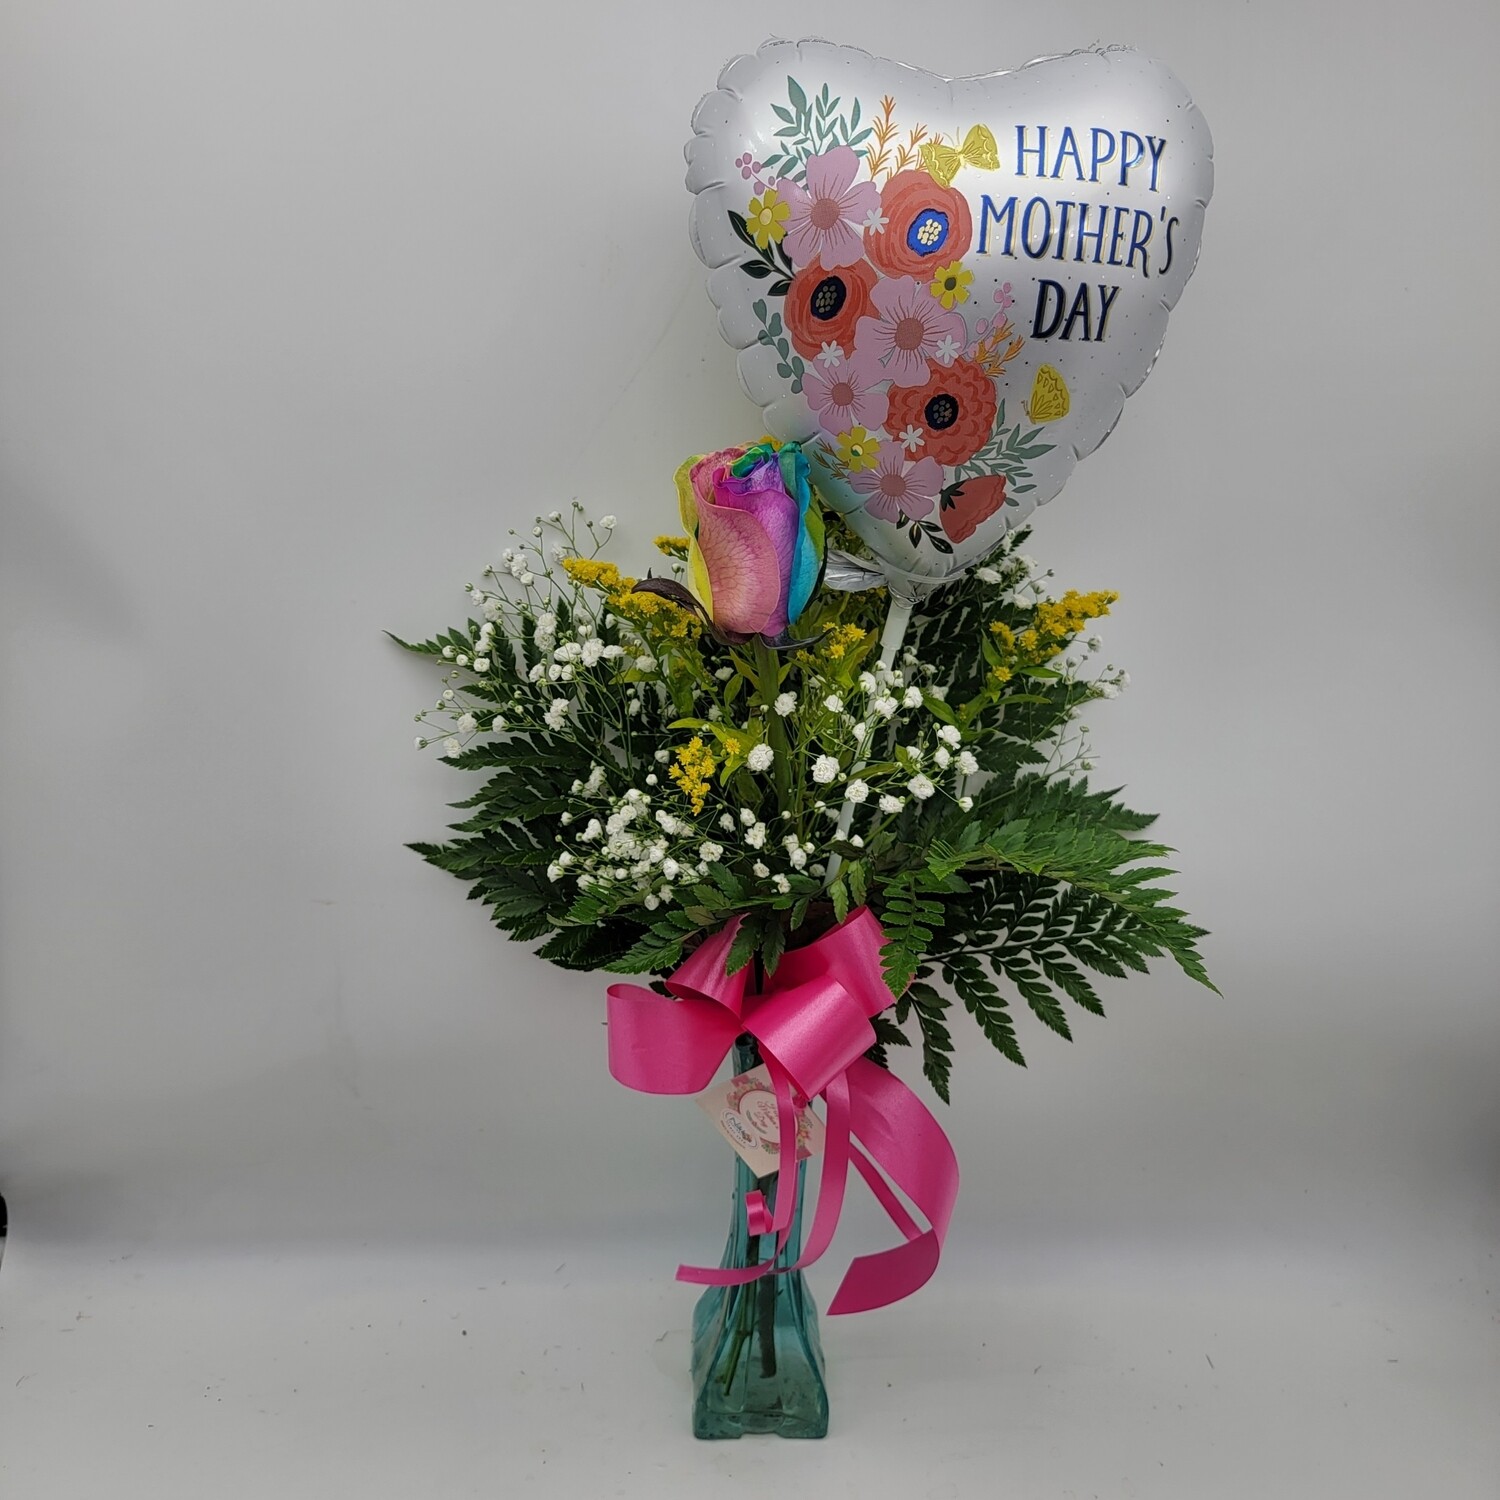 1 Rainbow Rose in a vase with a balloon 